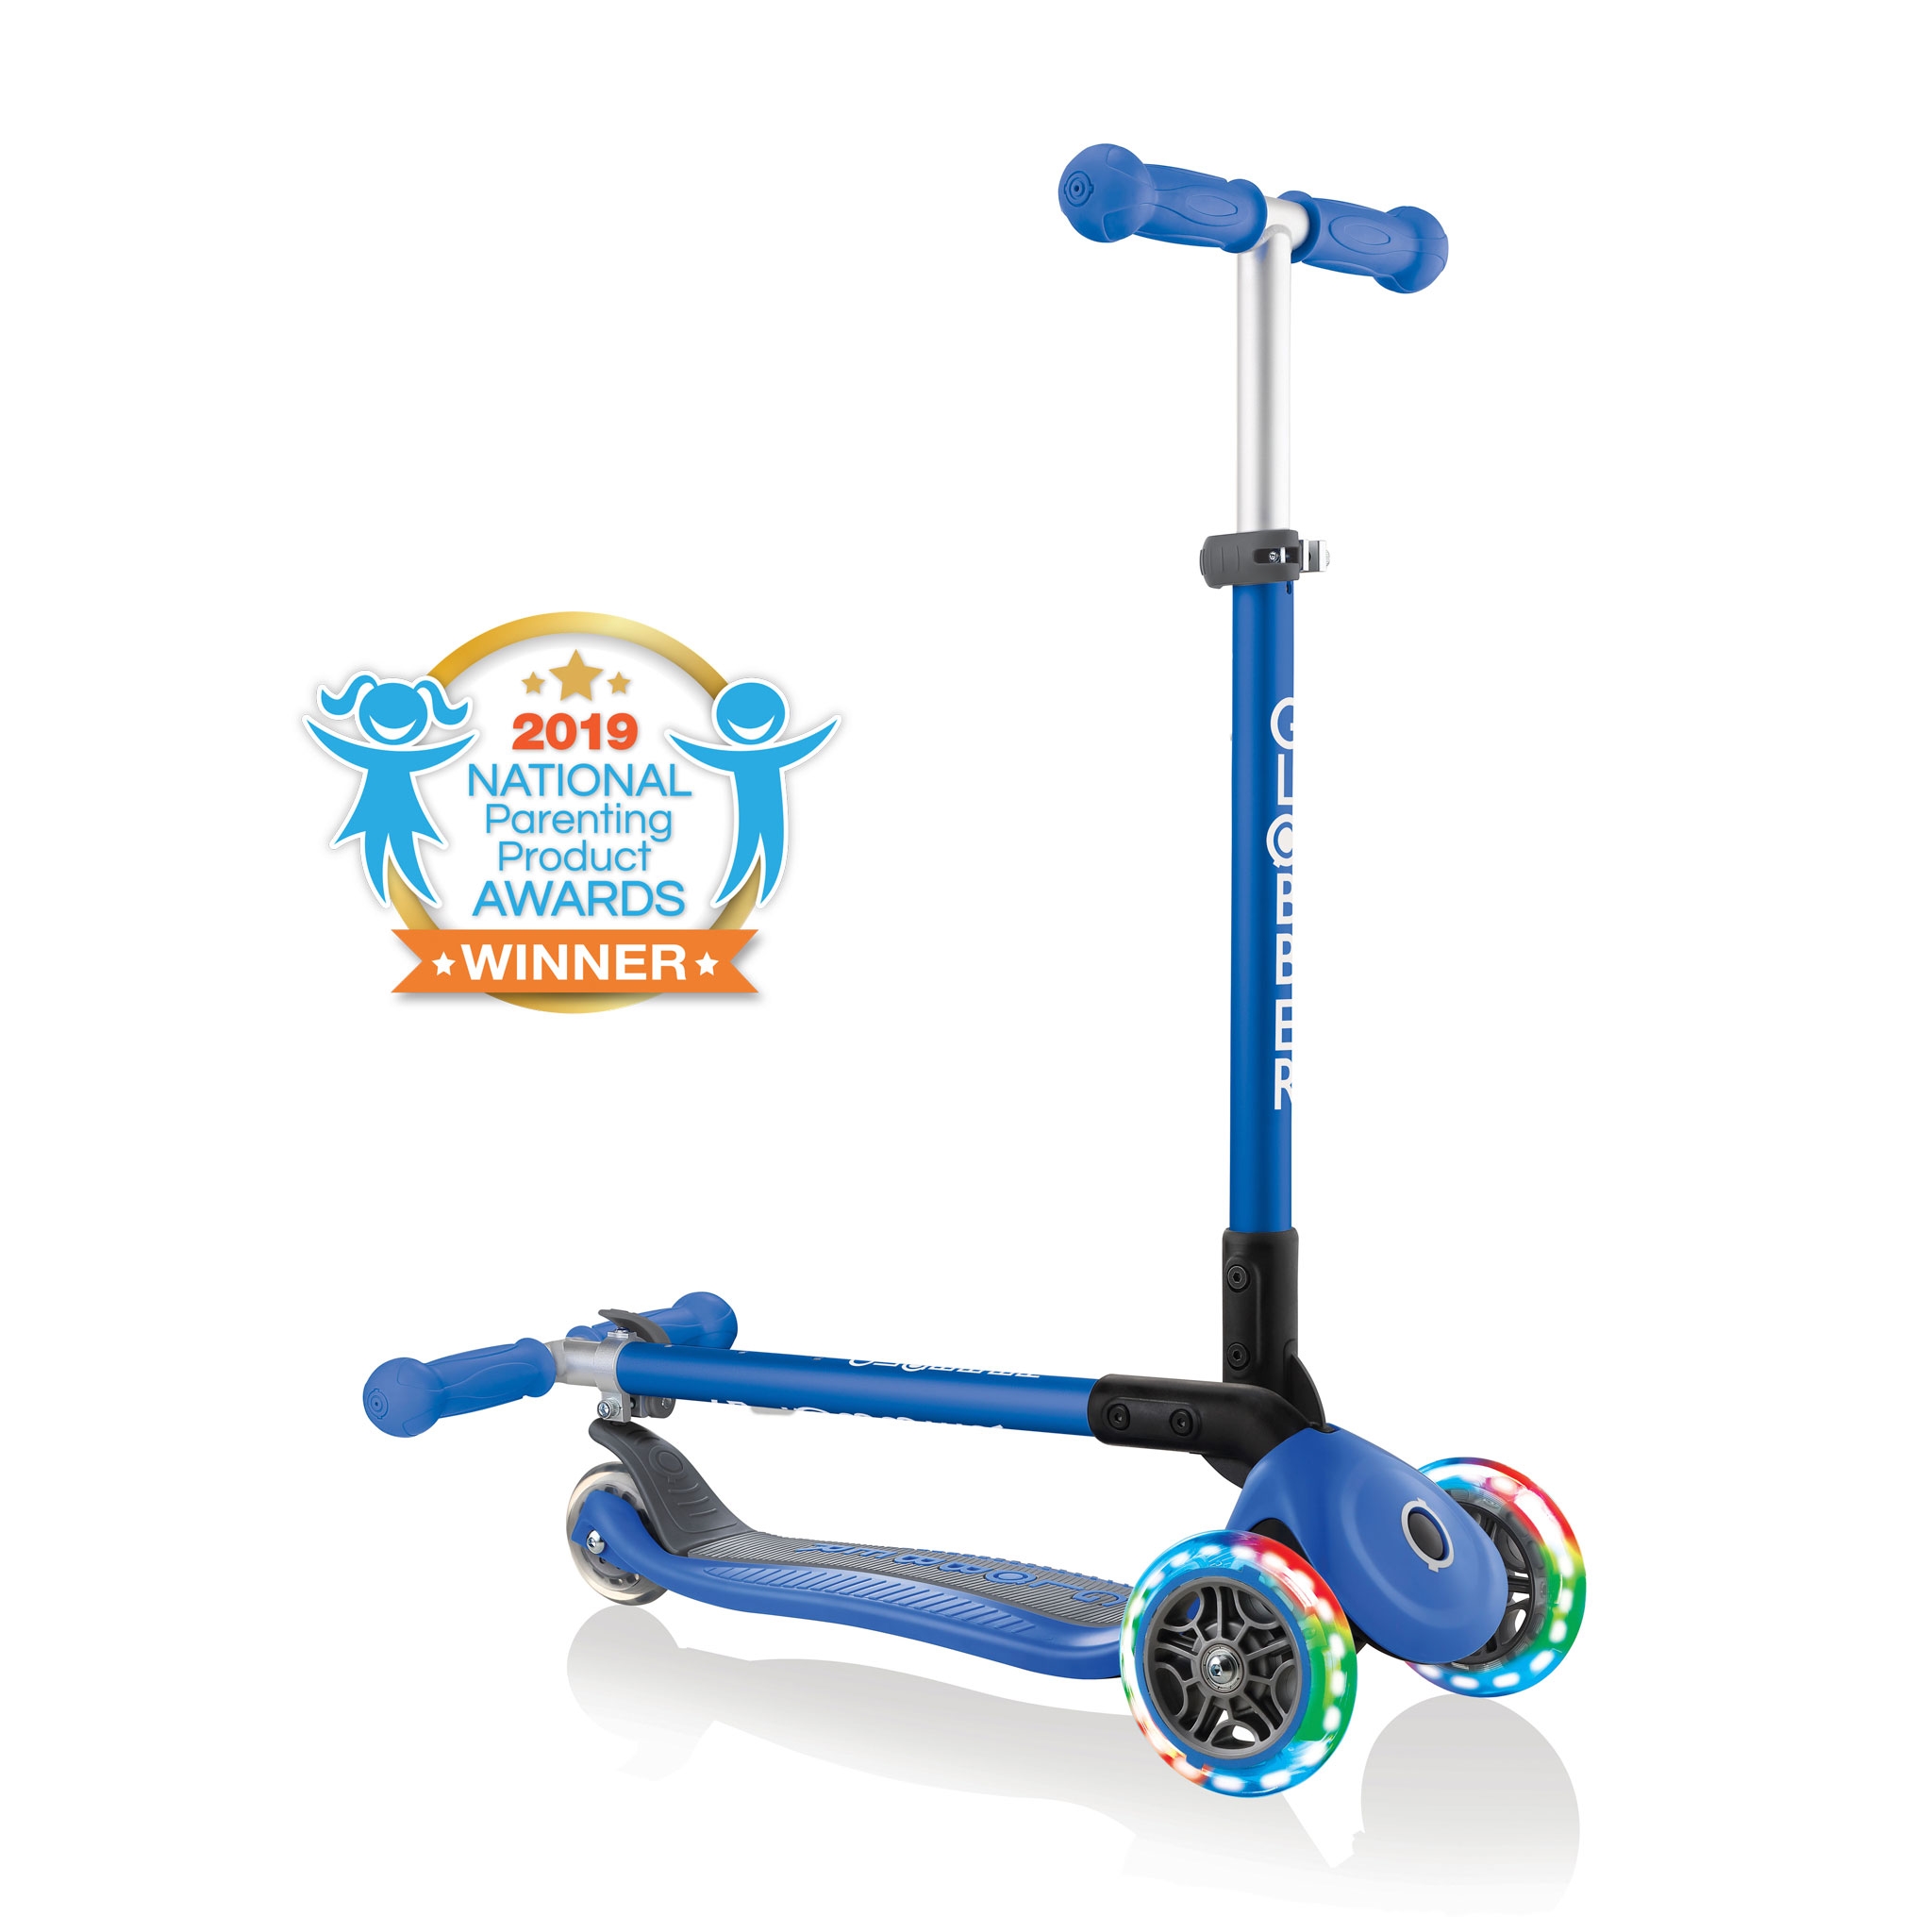 PRIMO-FOLDABLE-LIGHTS-3-wheel-fold-up-scooter-for-kids-navy-blue2 0